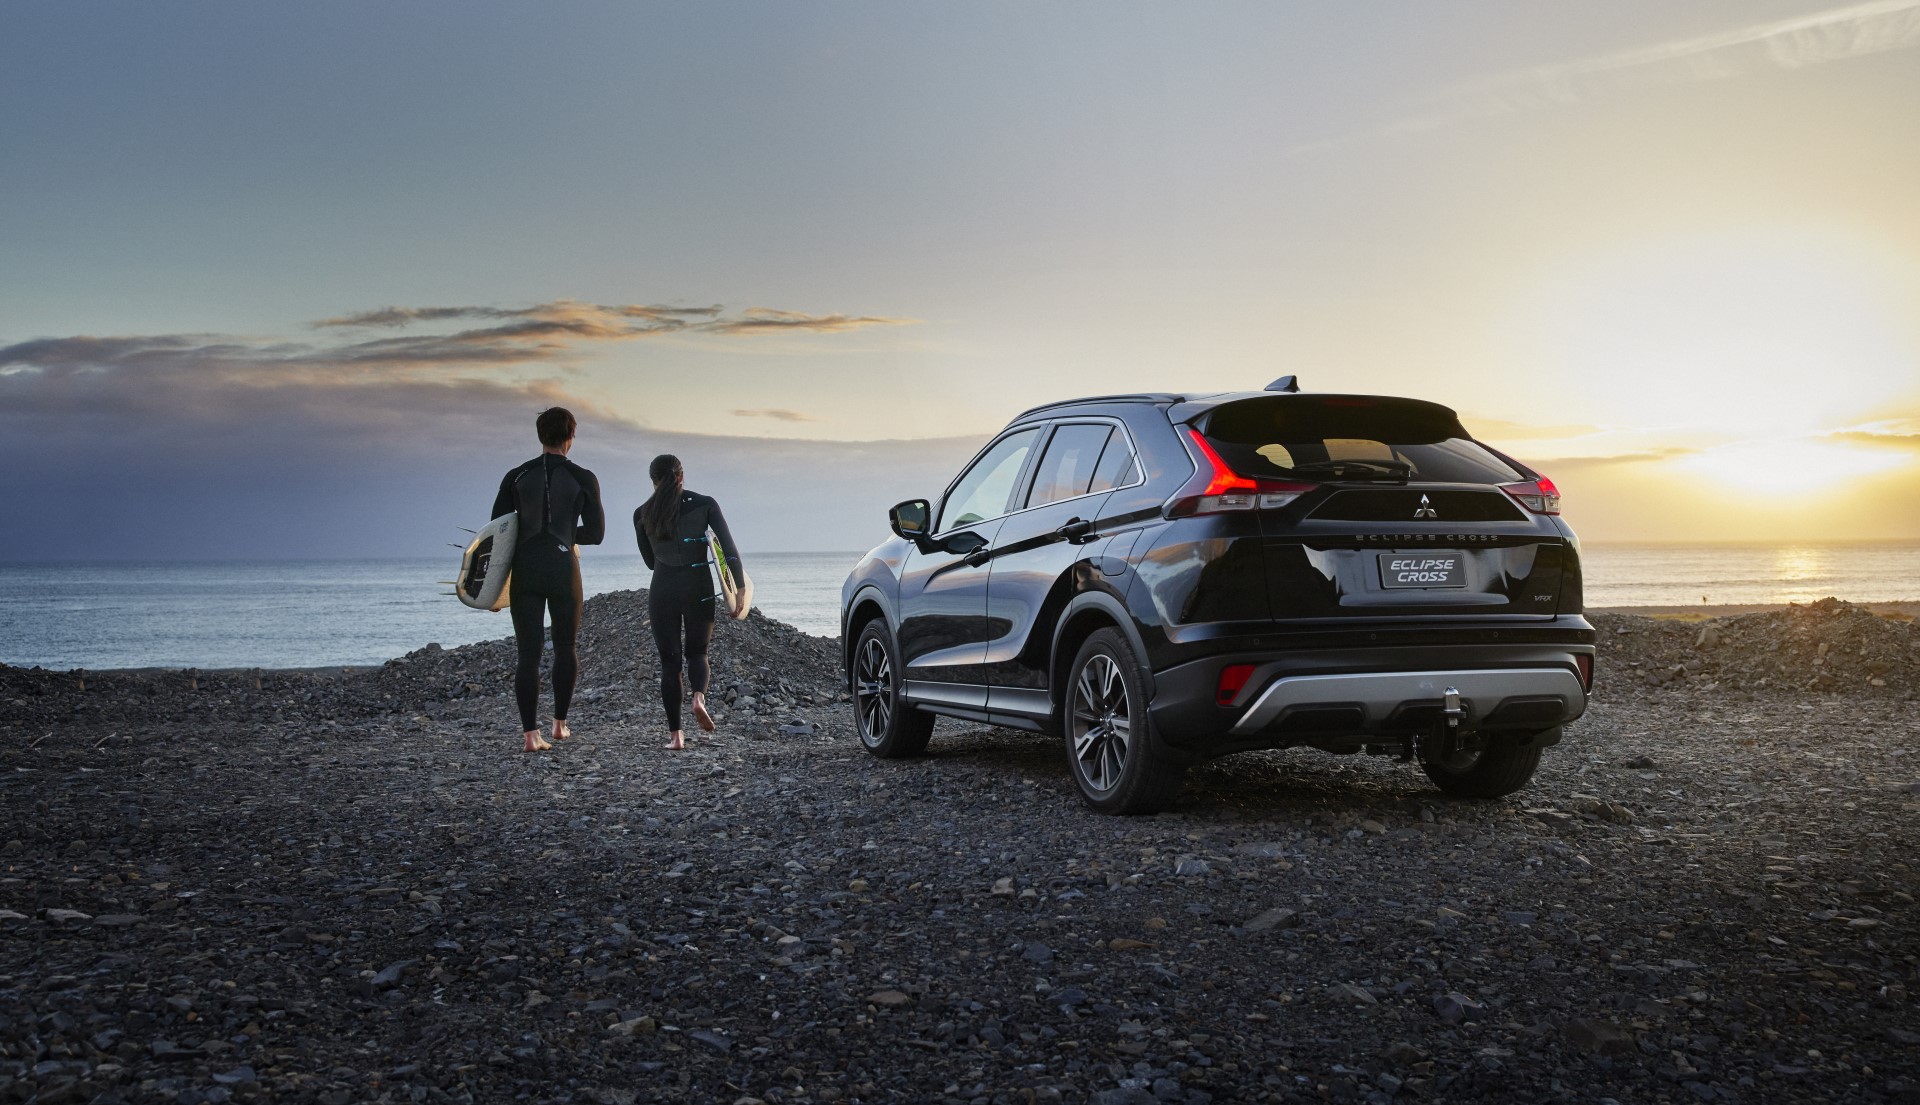 A Mitsubishi Eclipse Cross parked on a beach at sunrise with two people with wetsuits on carrying surfboards walking towards the ocean